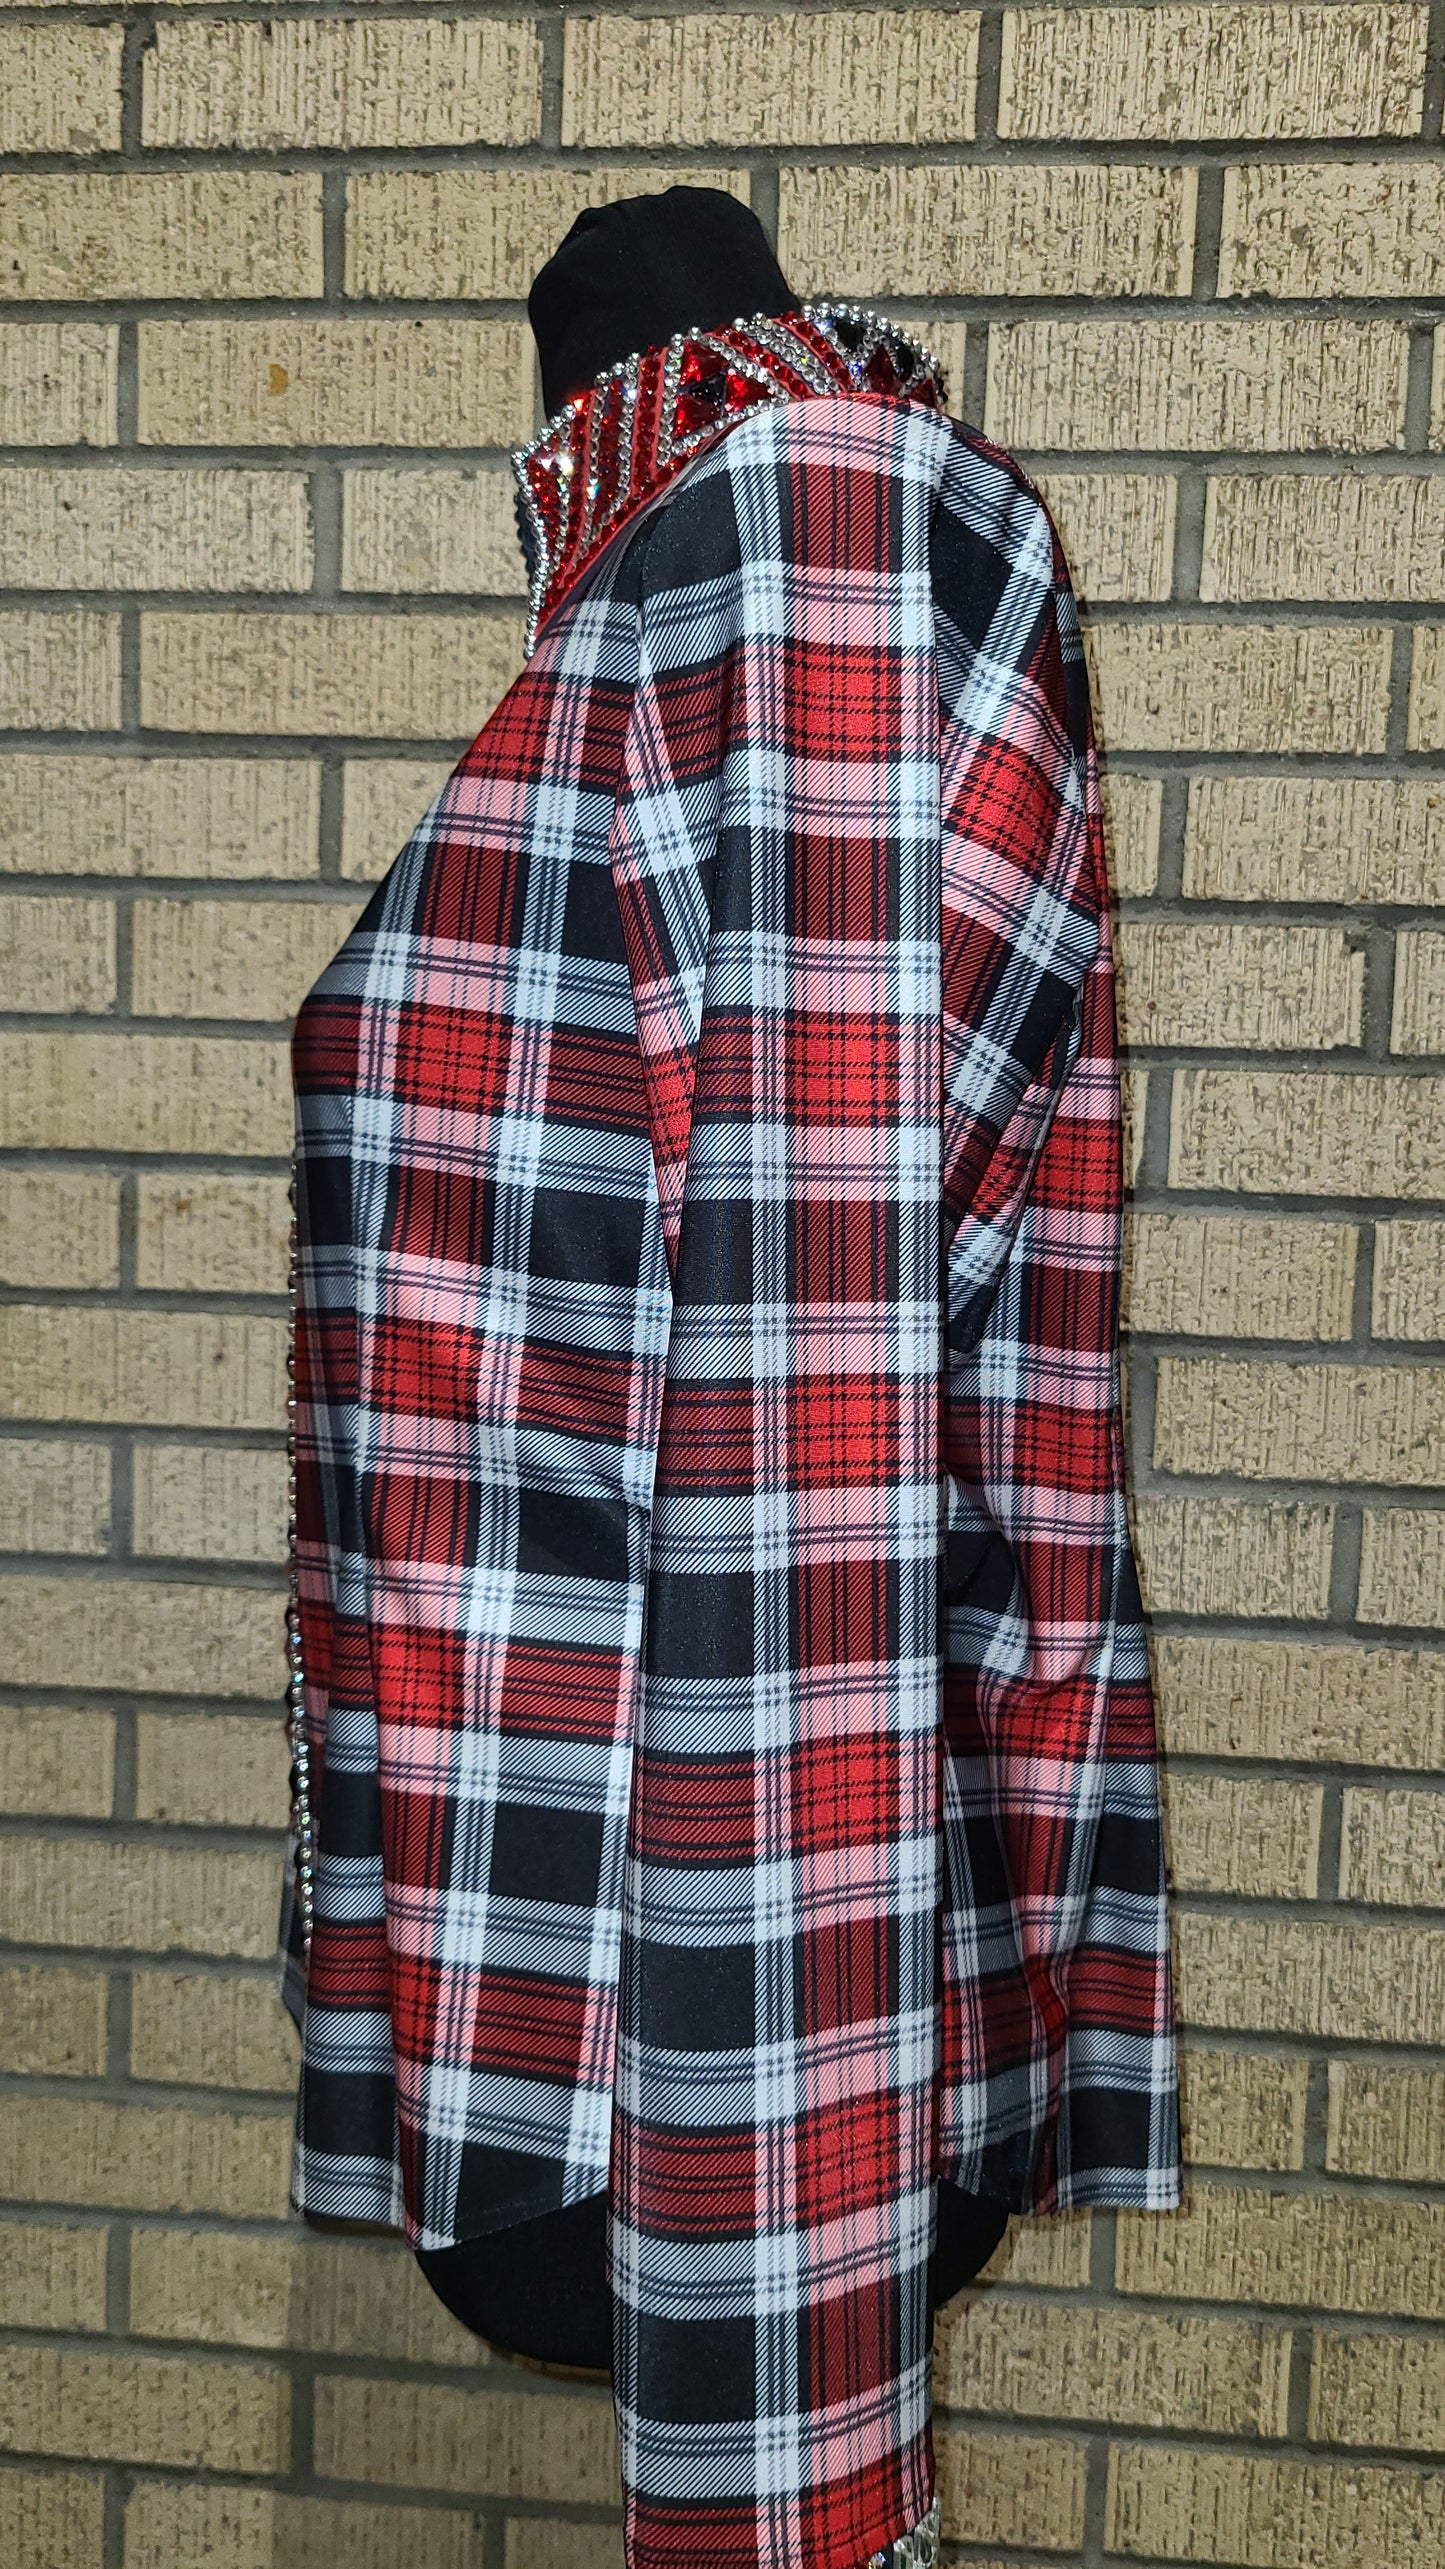 Large Red and Black Plaid stretch day shirt